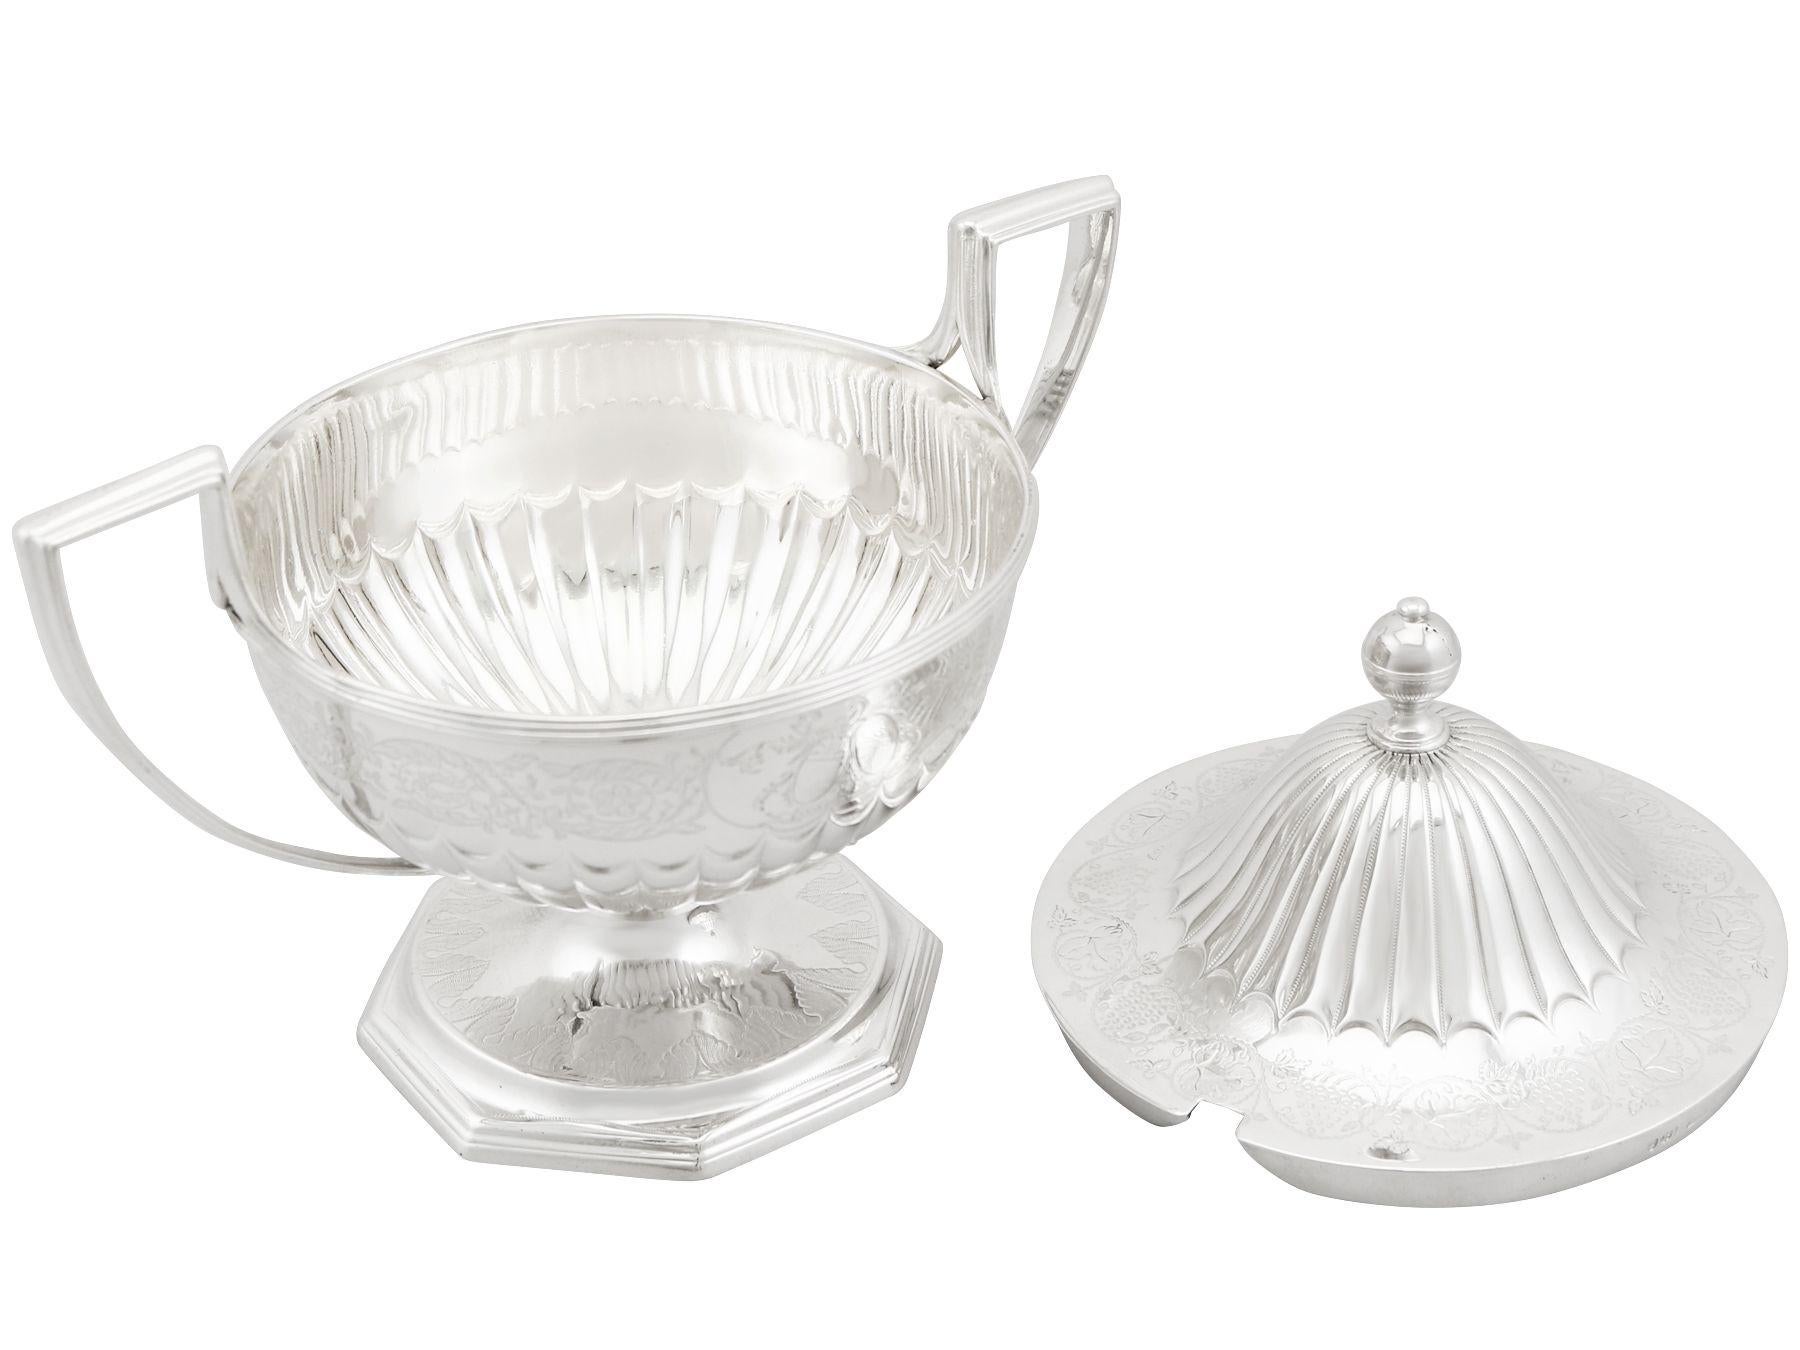 Antique Sterling Silver Sauce Tureens 2